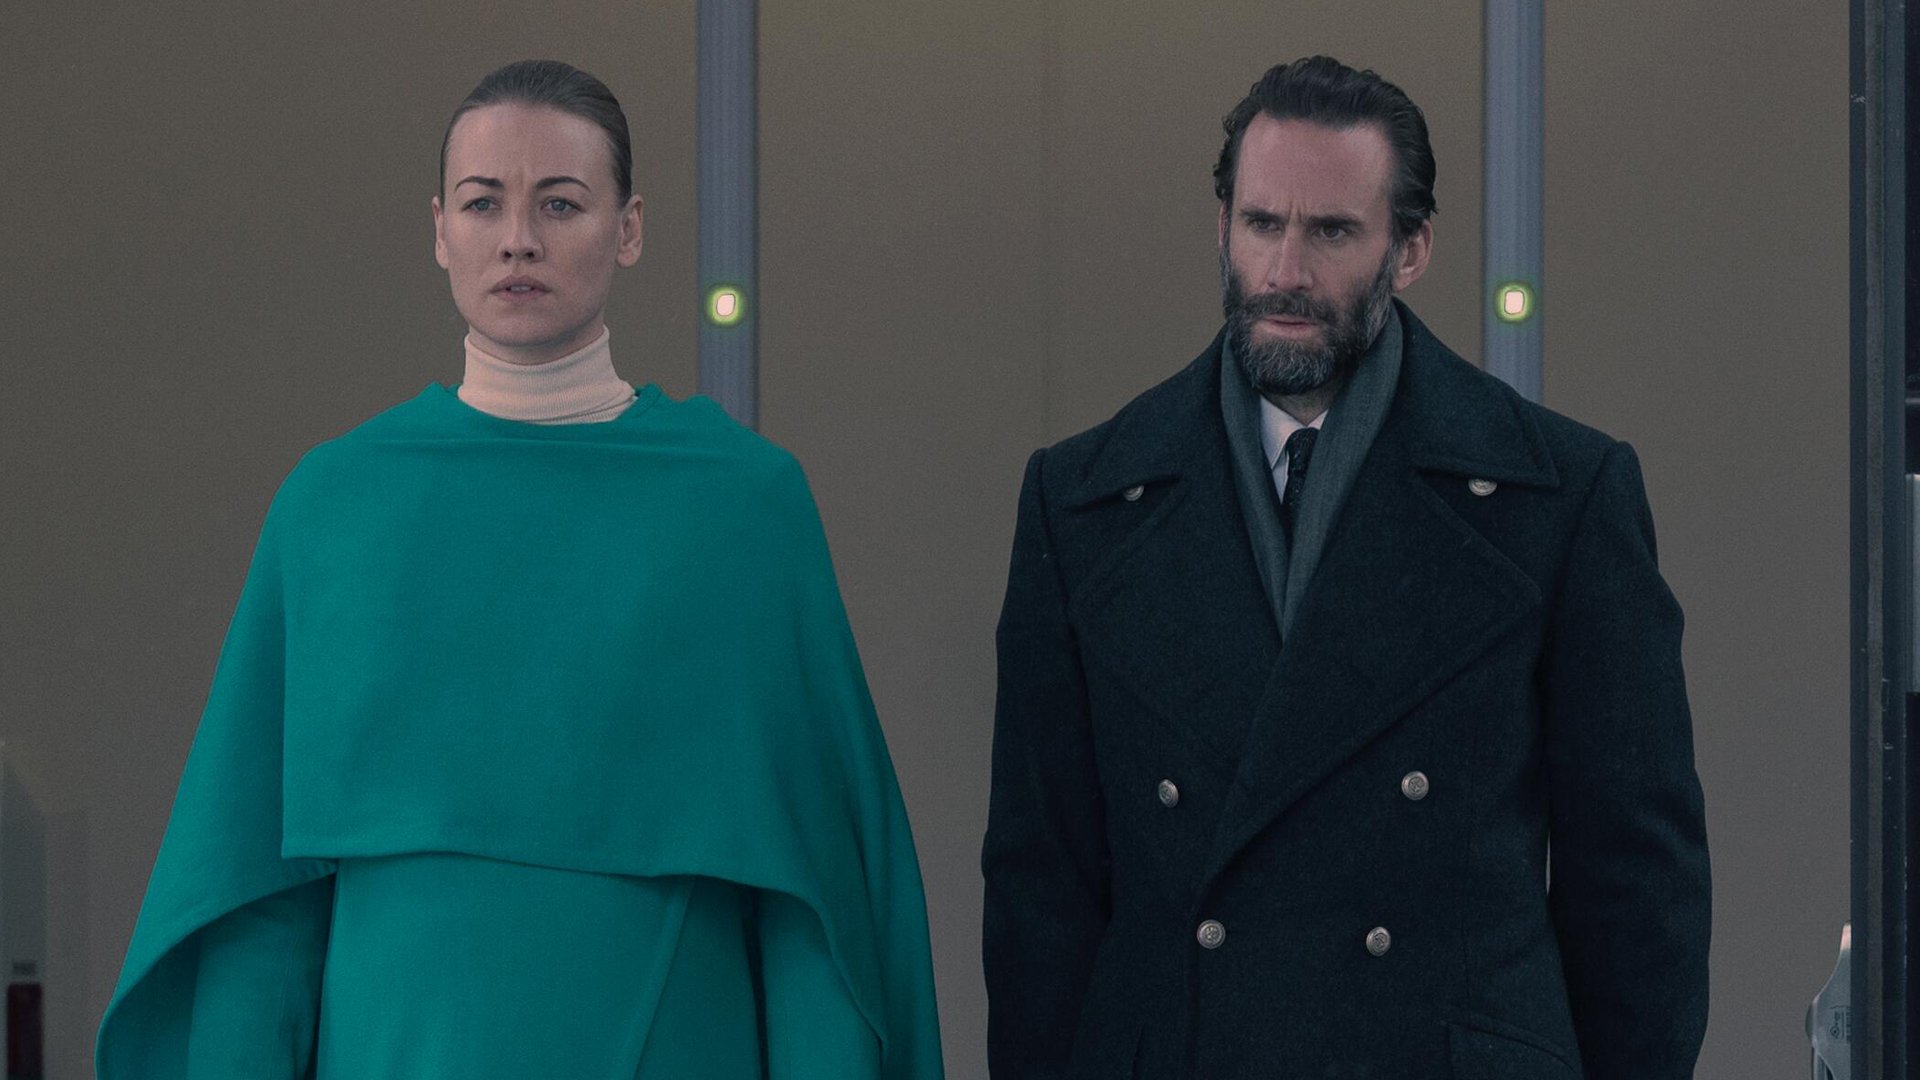 Yvonne Strahovski as Serena Joy and Joseph Fiennes as Fred talk together in ‘The Handmaid’s Tale’ Season 4 Episode 8, ‘Testimony’